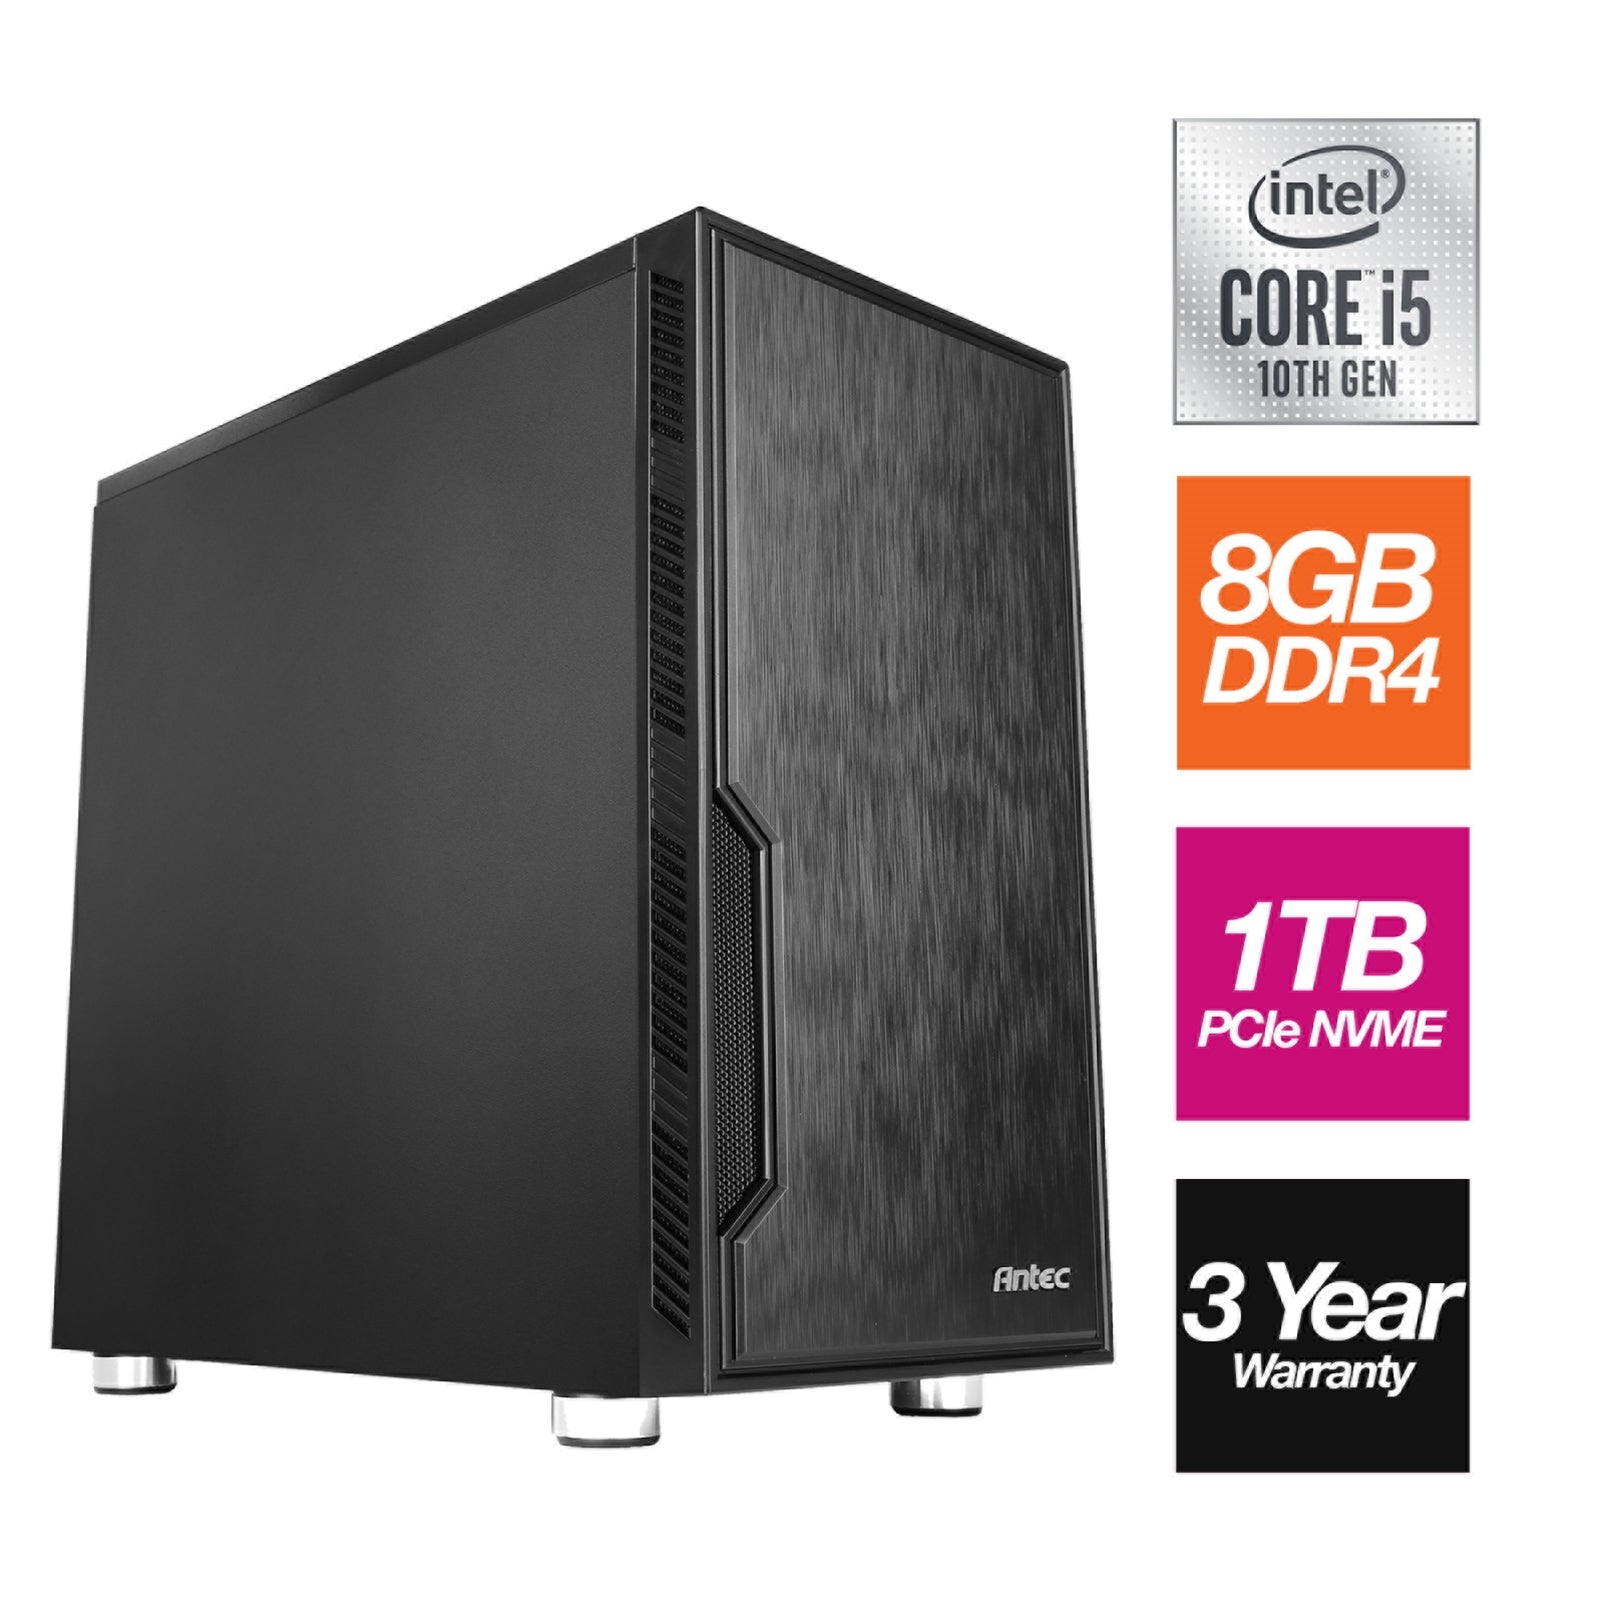 Intel i5-10400 6 Core 12 Threads 2.90GHz (4.30GHz Boost) CPU, 8GB DDR4 RAM, 1TB NVMe M.2, Antec VSK Chassis - Pre-Built PC